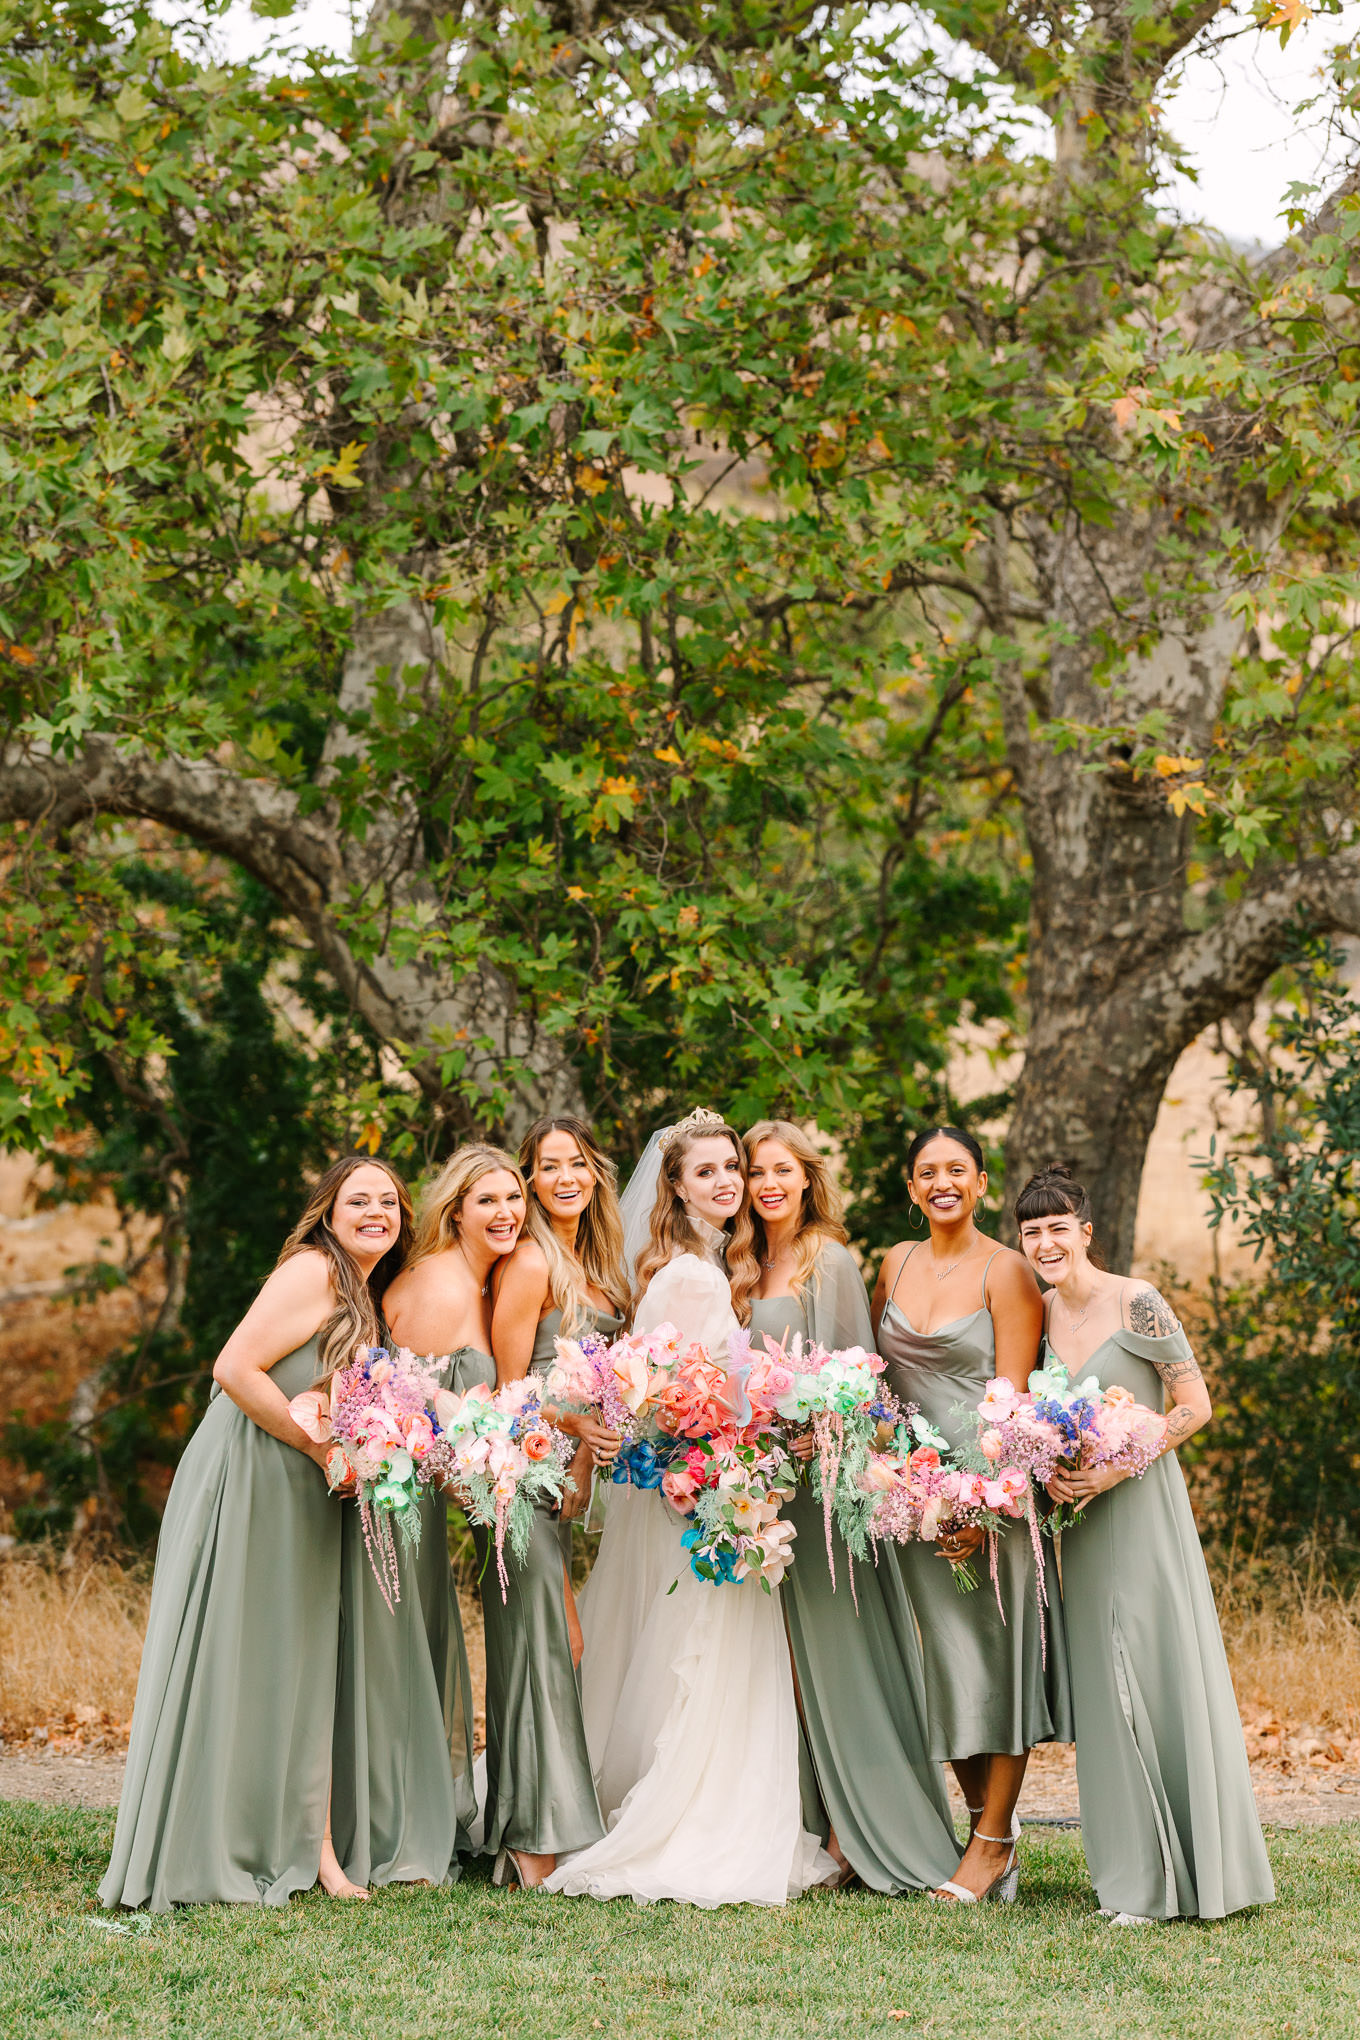 Bridesmaids in sage green gowns with colorful bouquets | Colorful and quirky wedding at Higuera Ranch in San Luis Obispo | #sanluisobispowedding #californiawedding #higueraranch #madonnainn   Source: Mary Costa Photography | Los Angeles